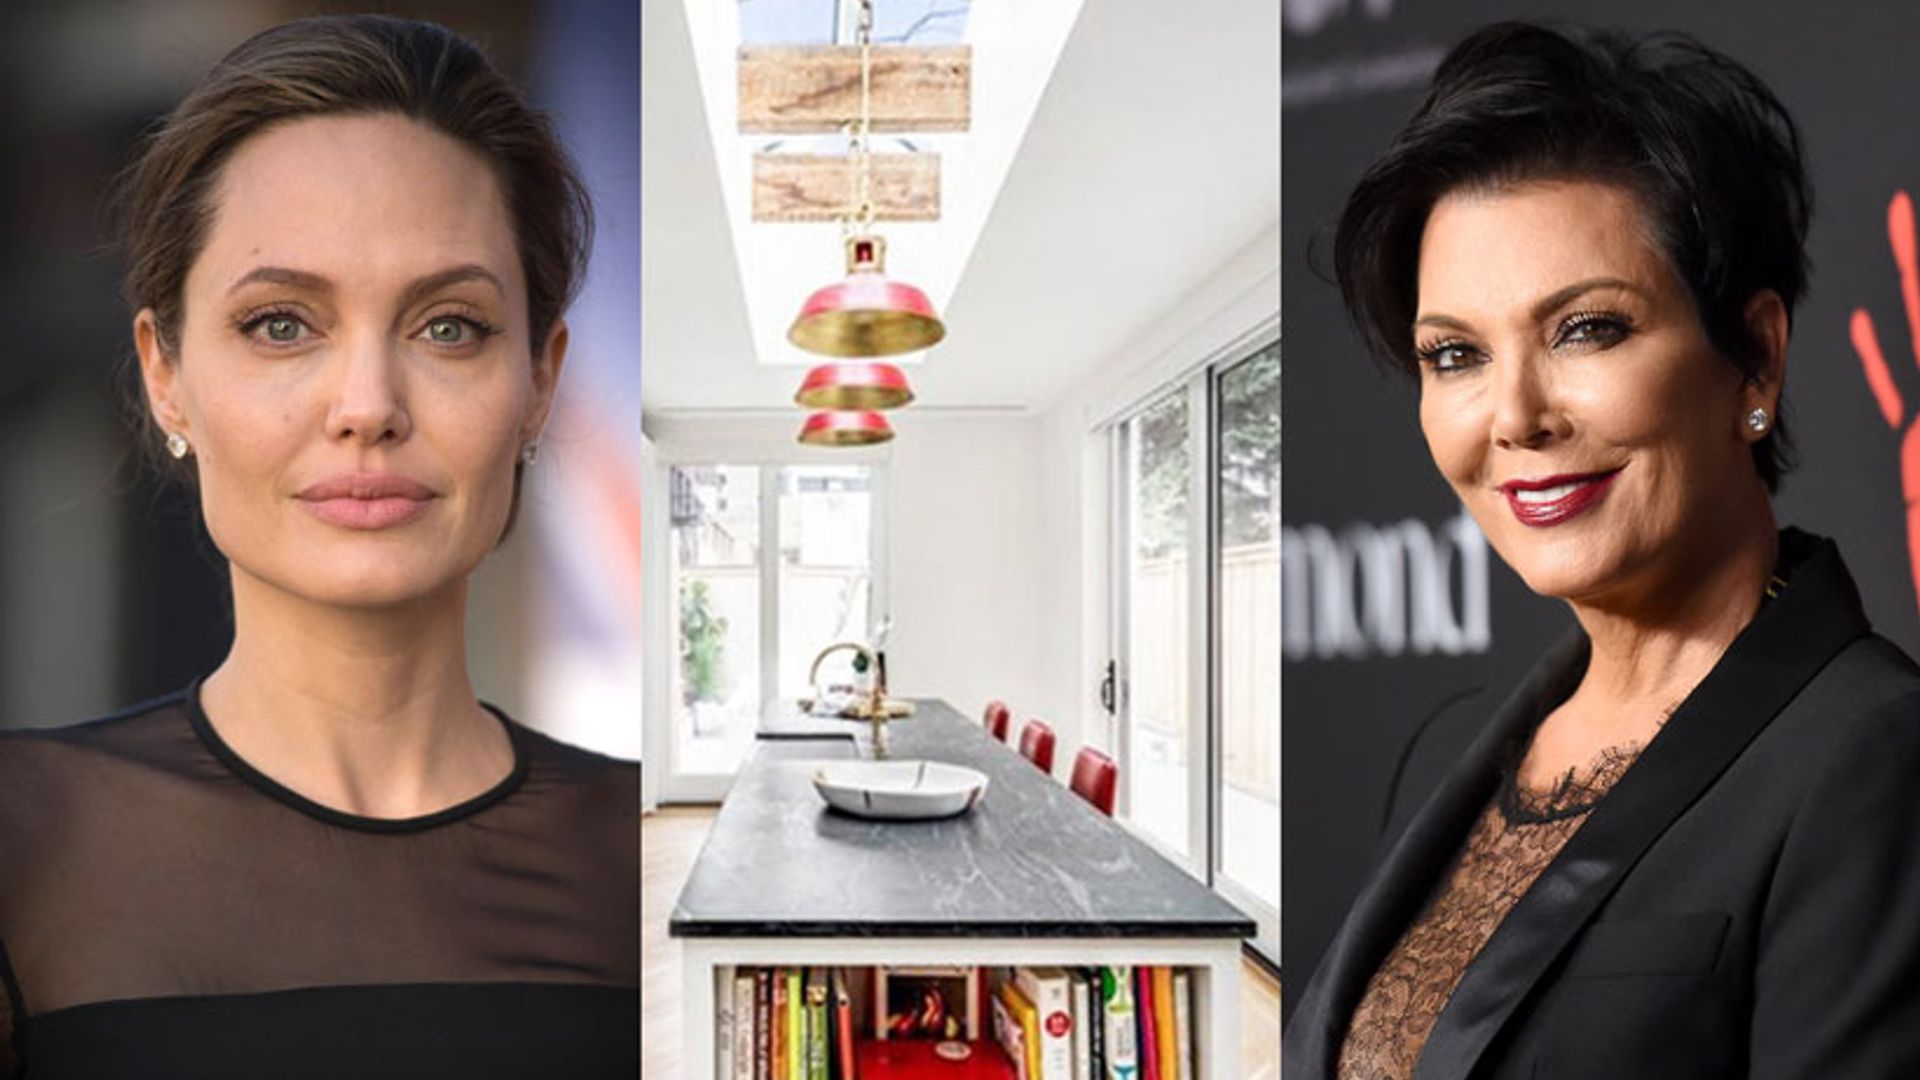 Video: Inside the most chic celebrity kitchens - including Golden Globes nominee Emily Blunt